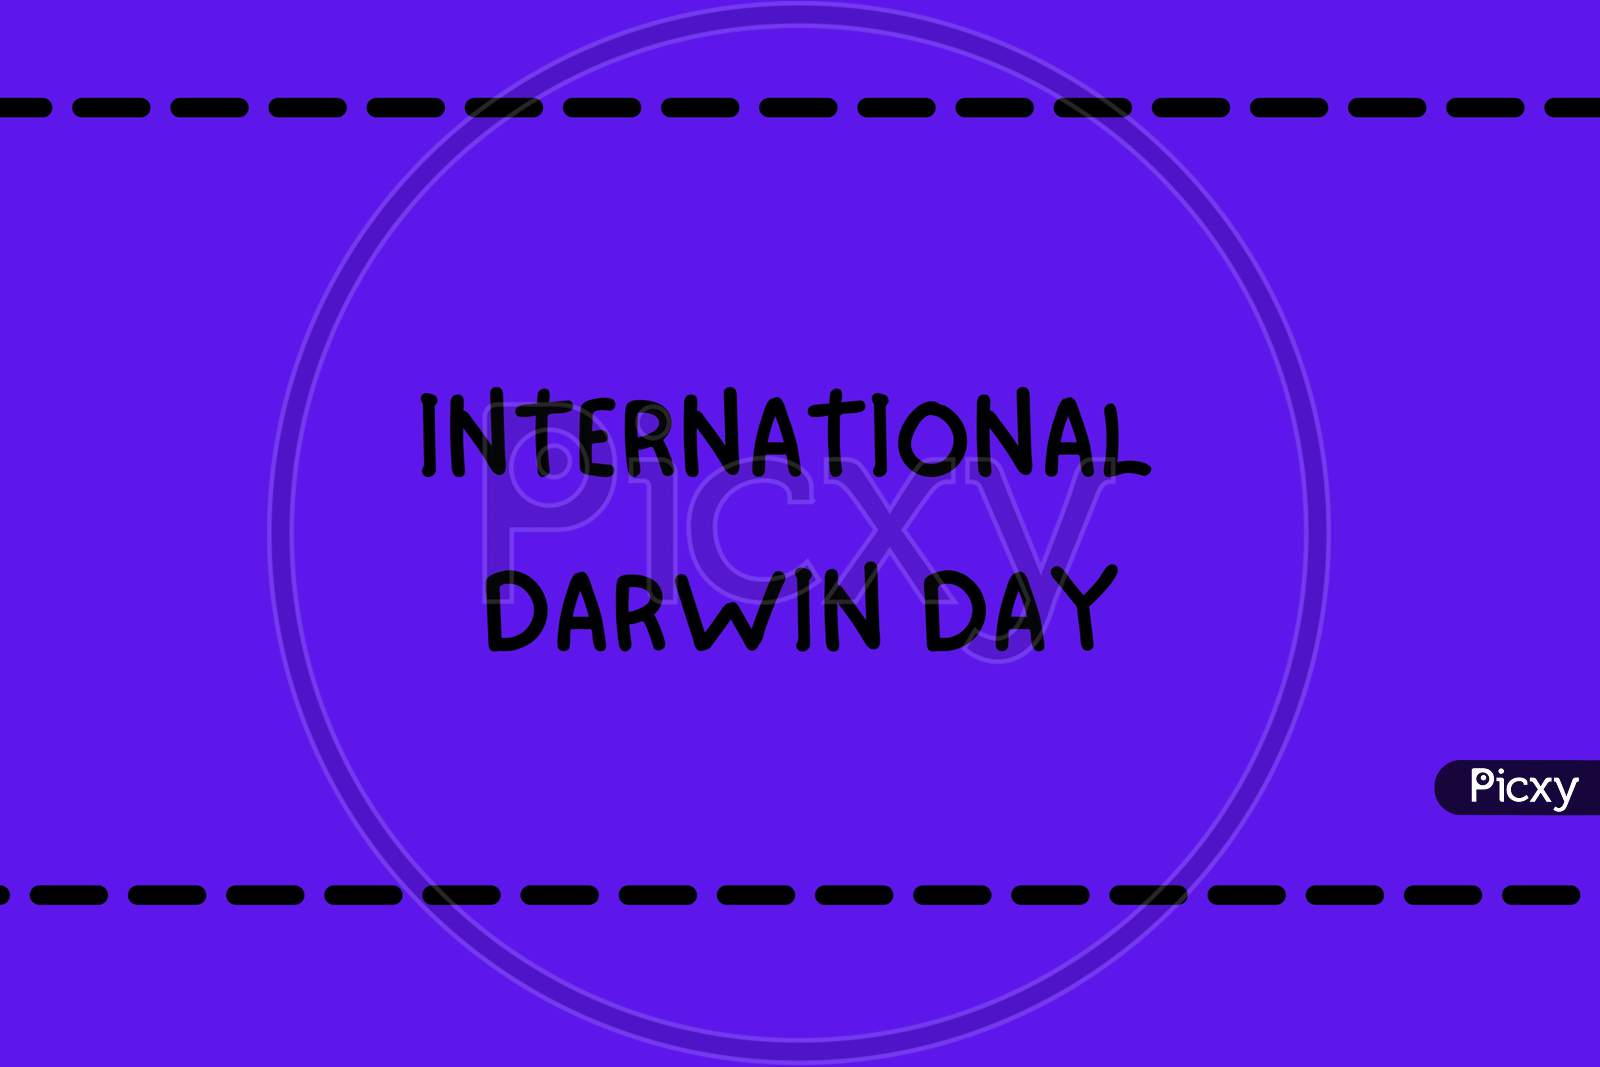 International Darwin Day On February 12. Text With Dark Blue Background With Lines